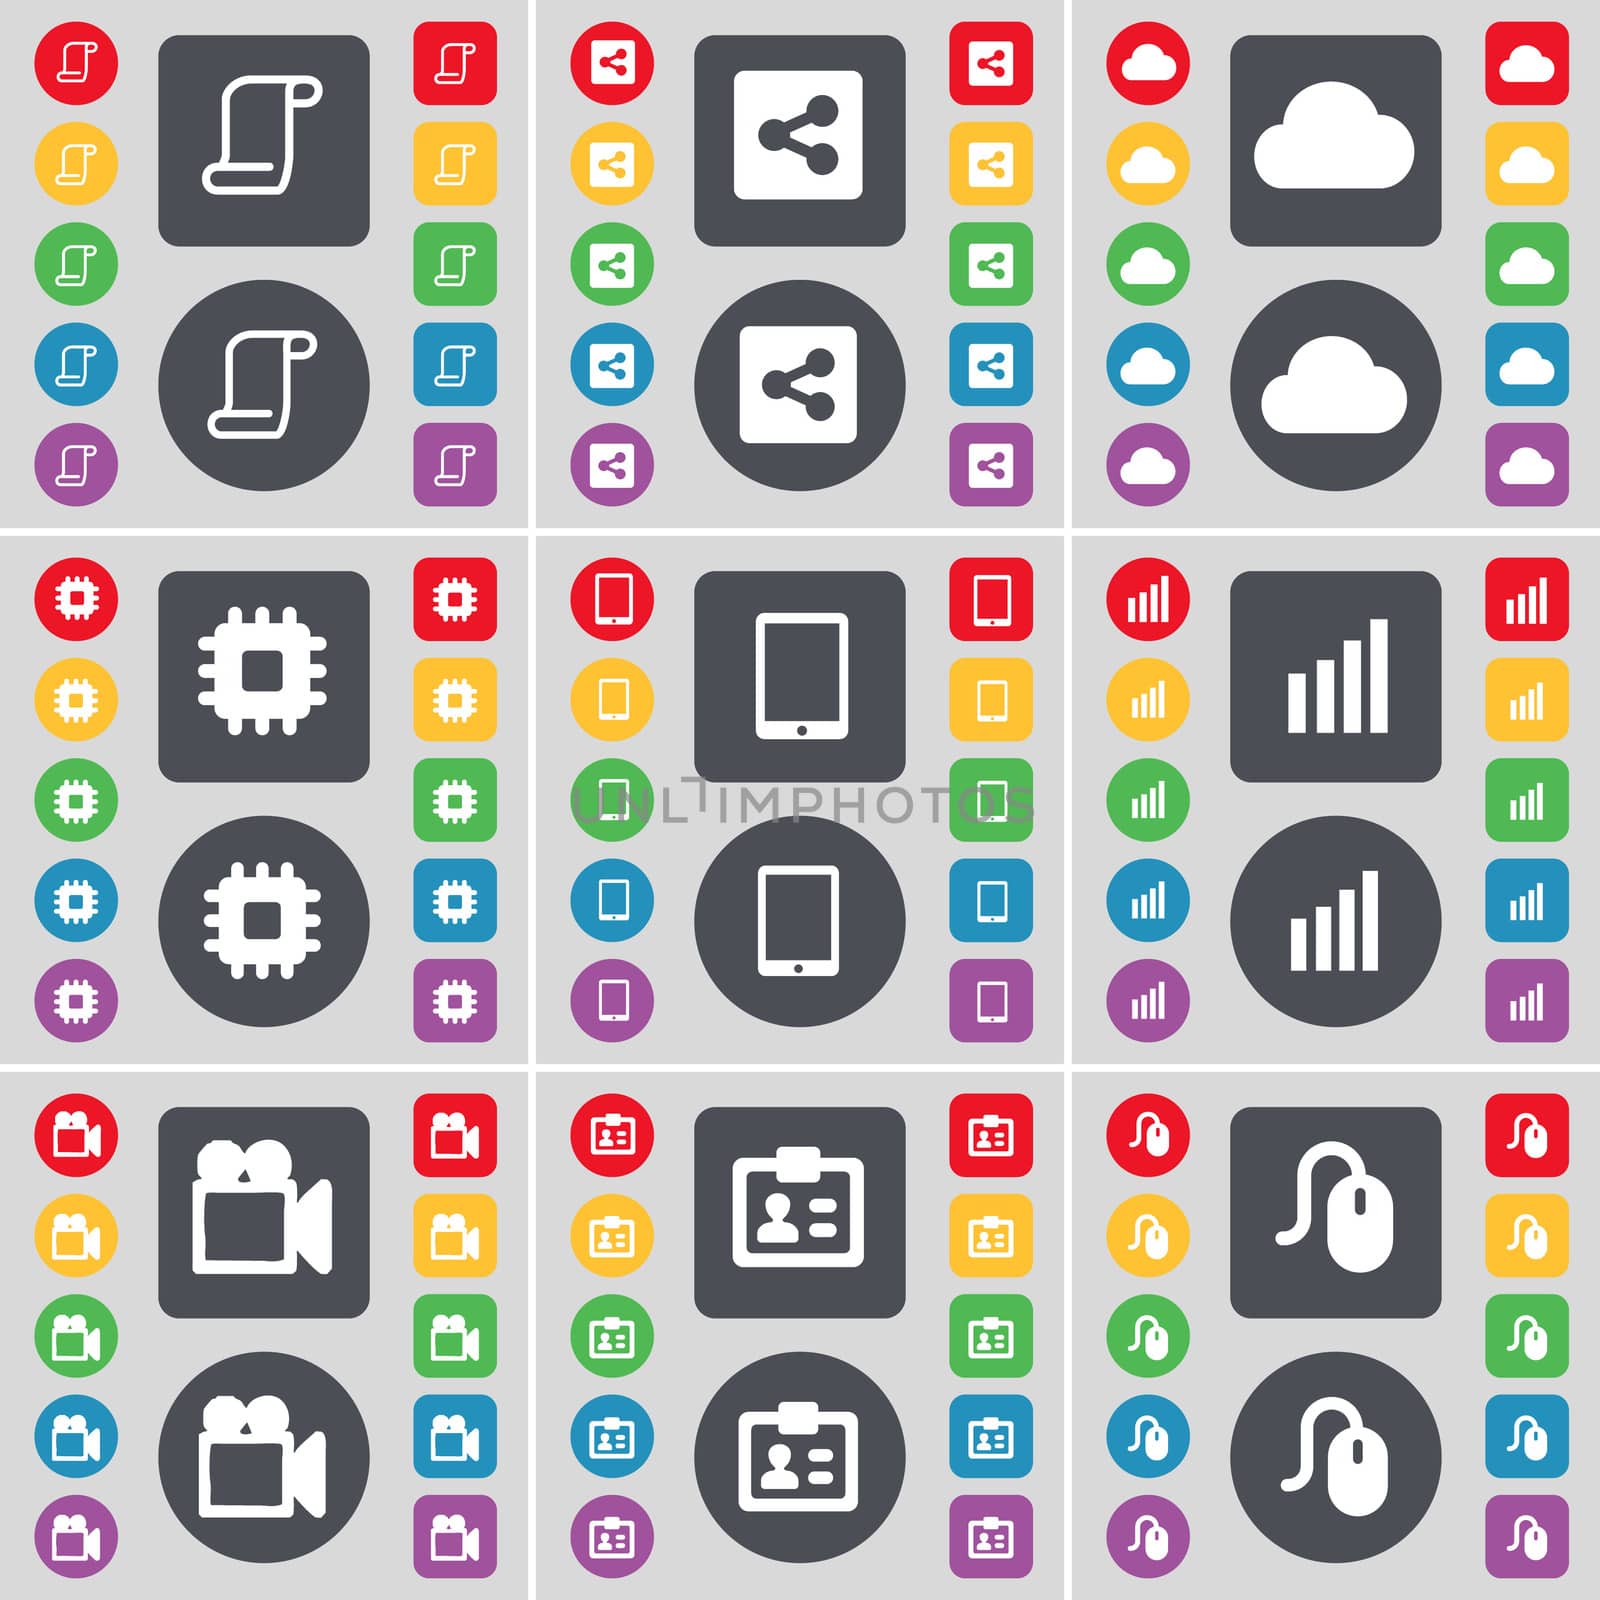 Scroll, Share, Cloud, Processor, Tablet PC, Diagram, Film camera, Contact, Mouse icon symbol. A large set of flat, colored buttons for your design. illustration